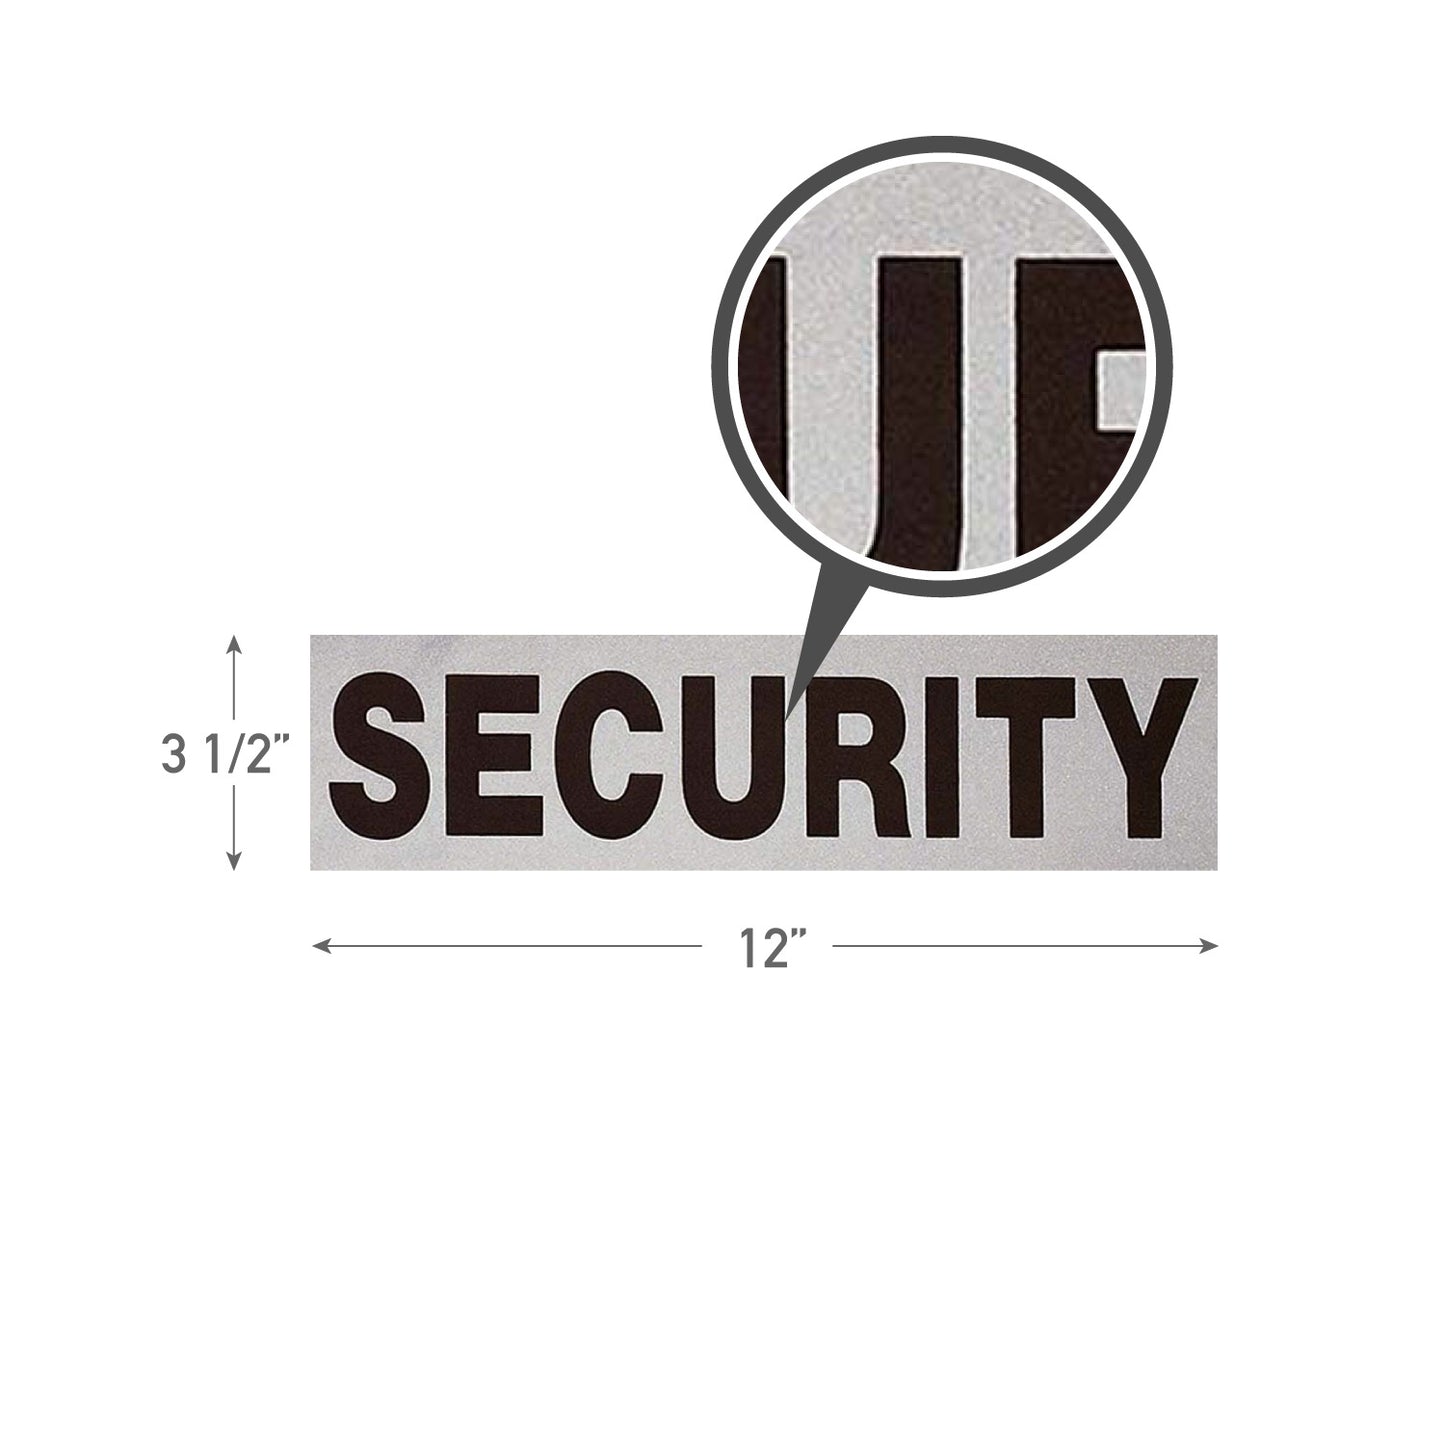 SECURITY Reflective Patch